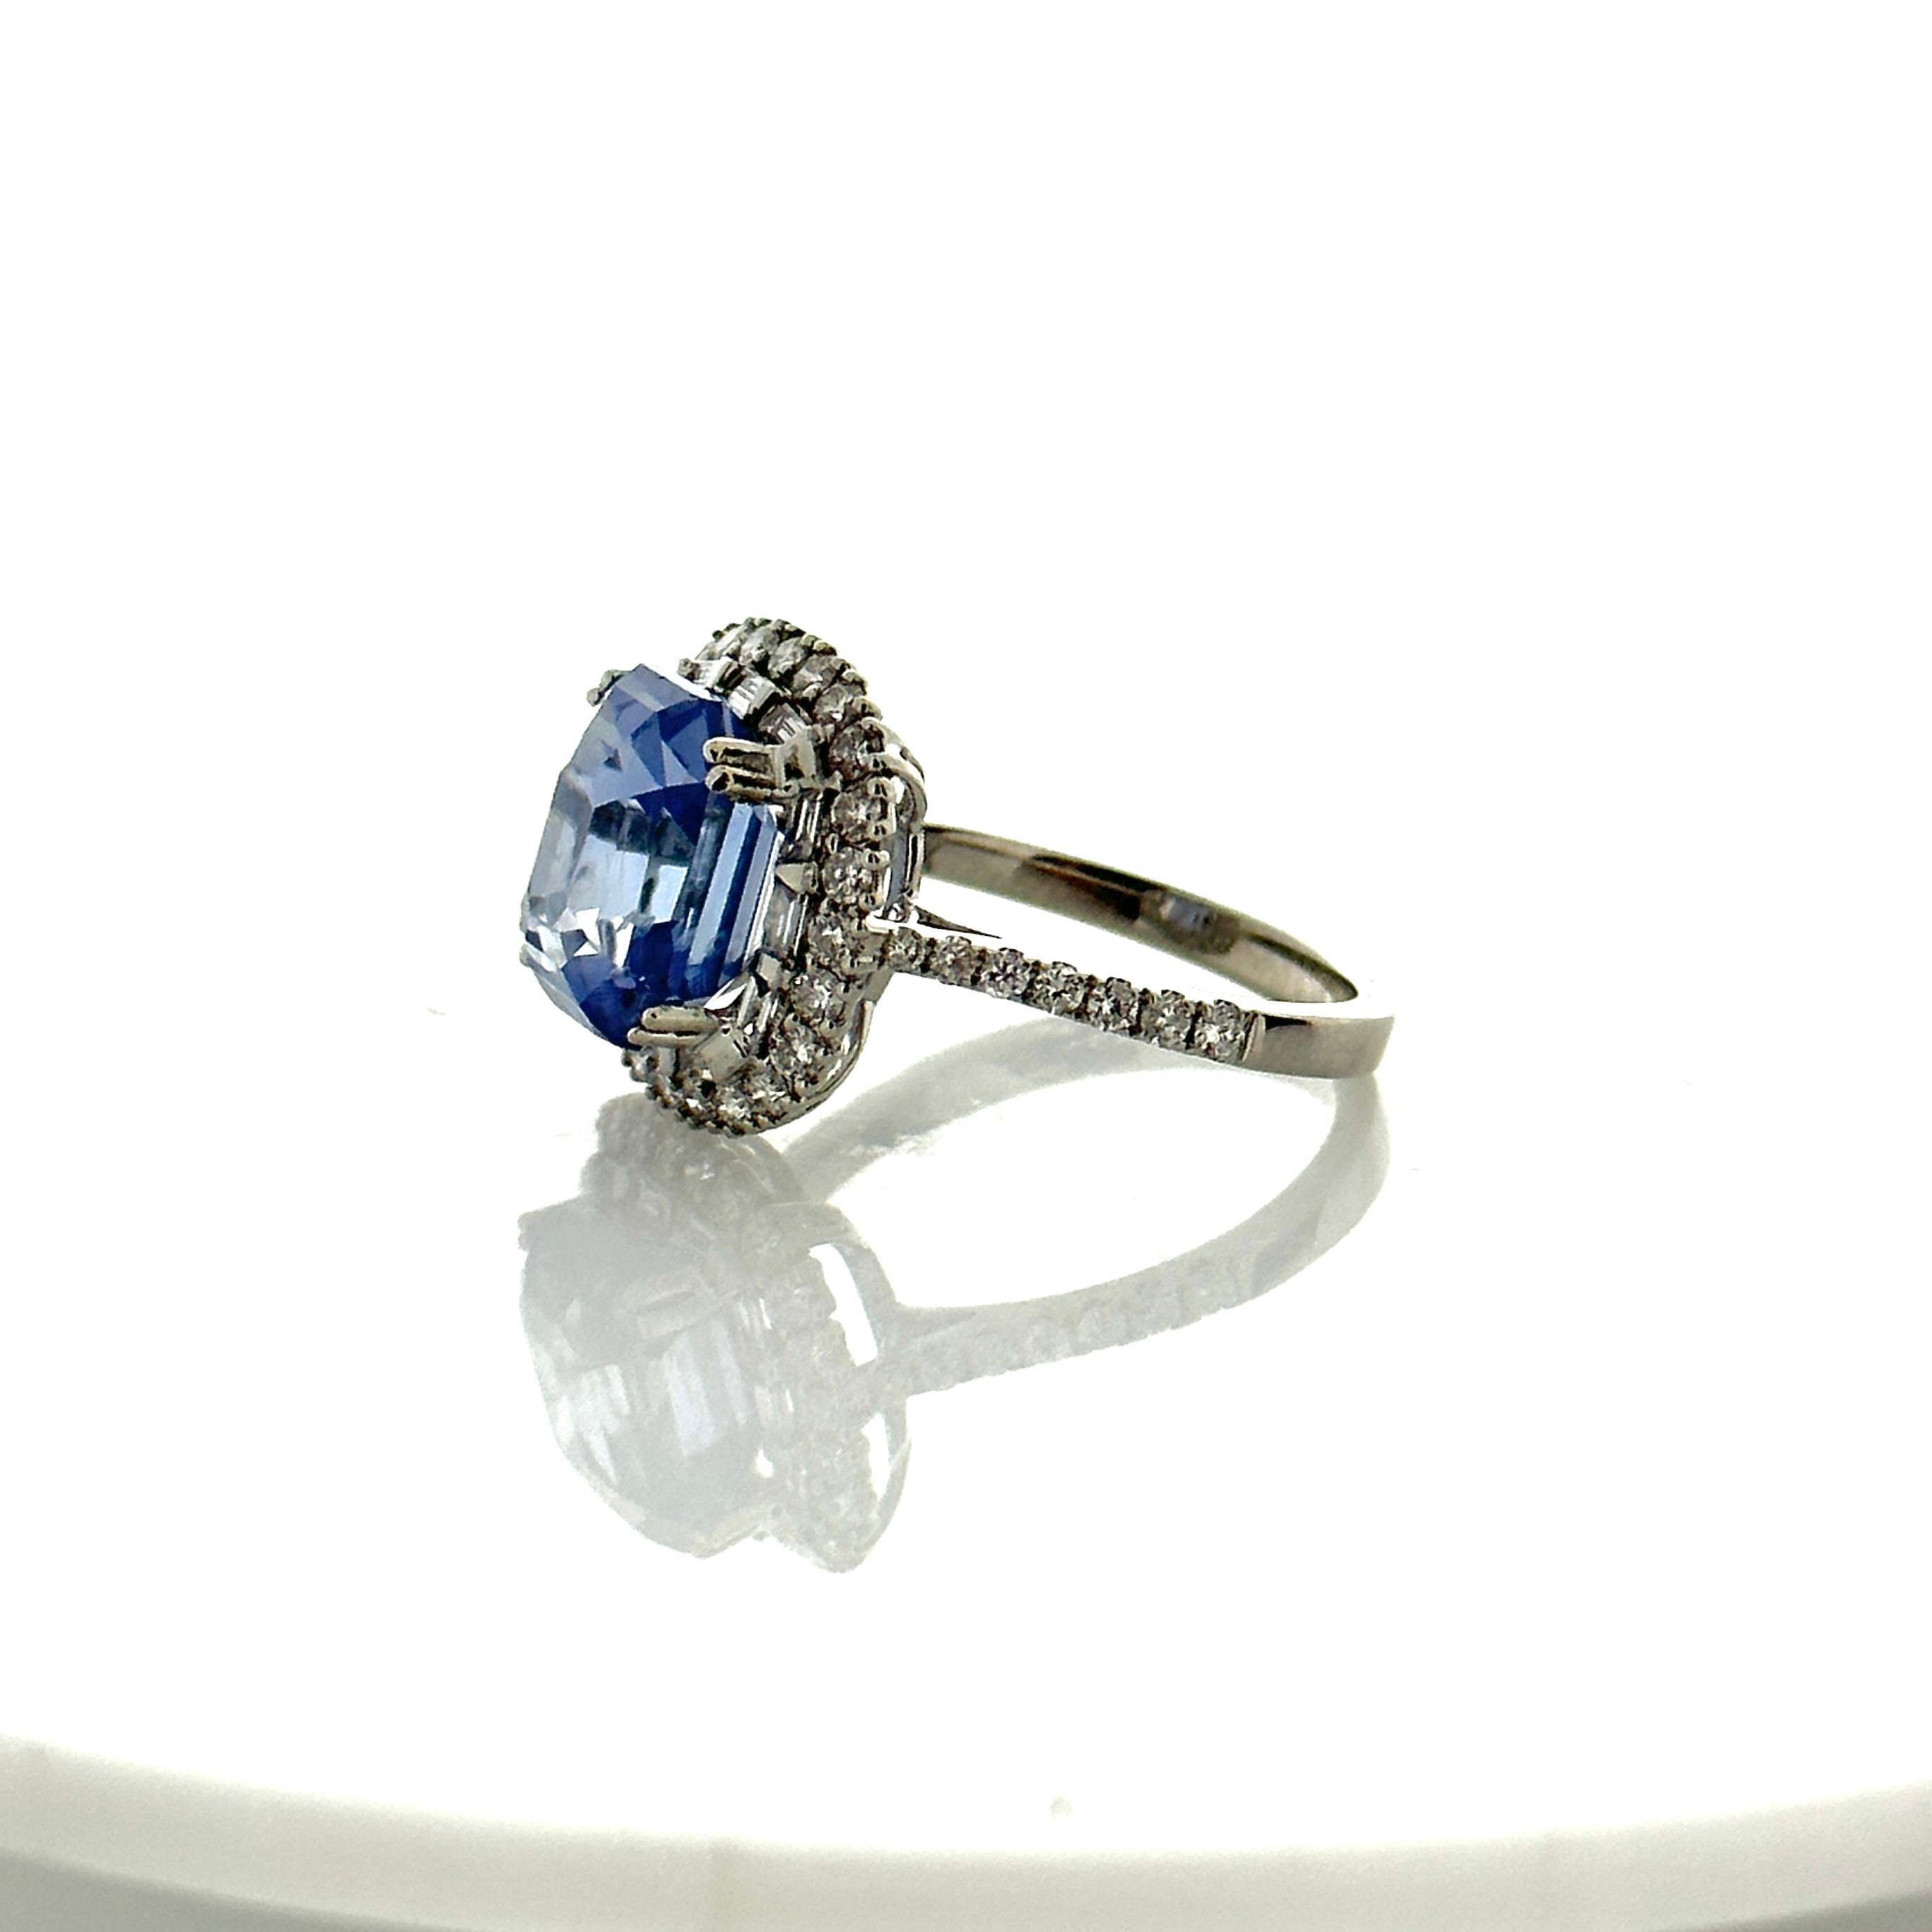 This is a 6.74 carats royal blue sapphire that is surrounded by a stunning halo of round brilliant diamonds. The sapphire is from Sri Lanka. The color is royal blue; its luster, clarity, and transparency are exceptional. The 0.89 carat total weight